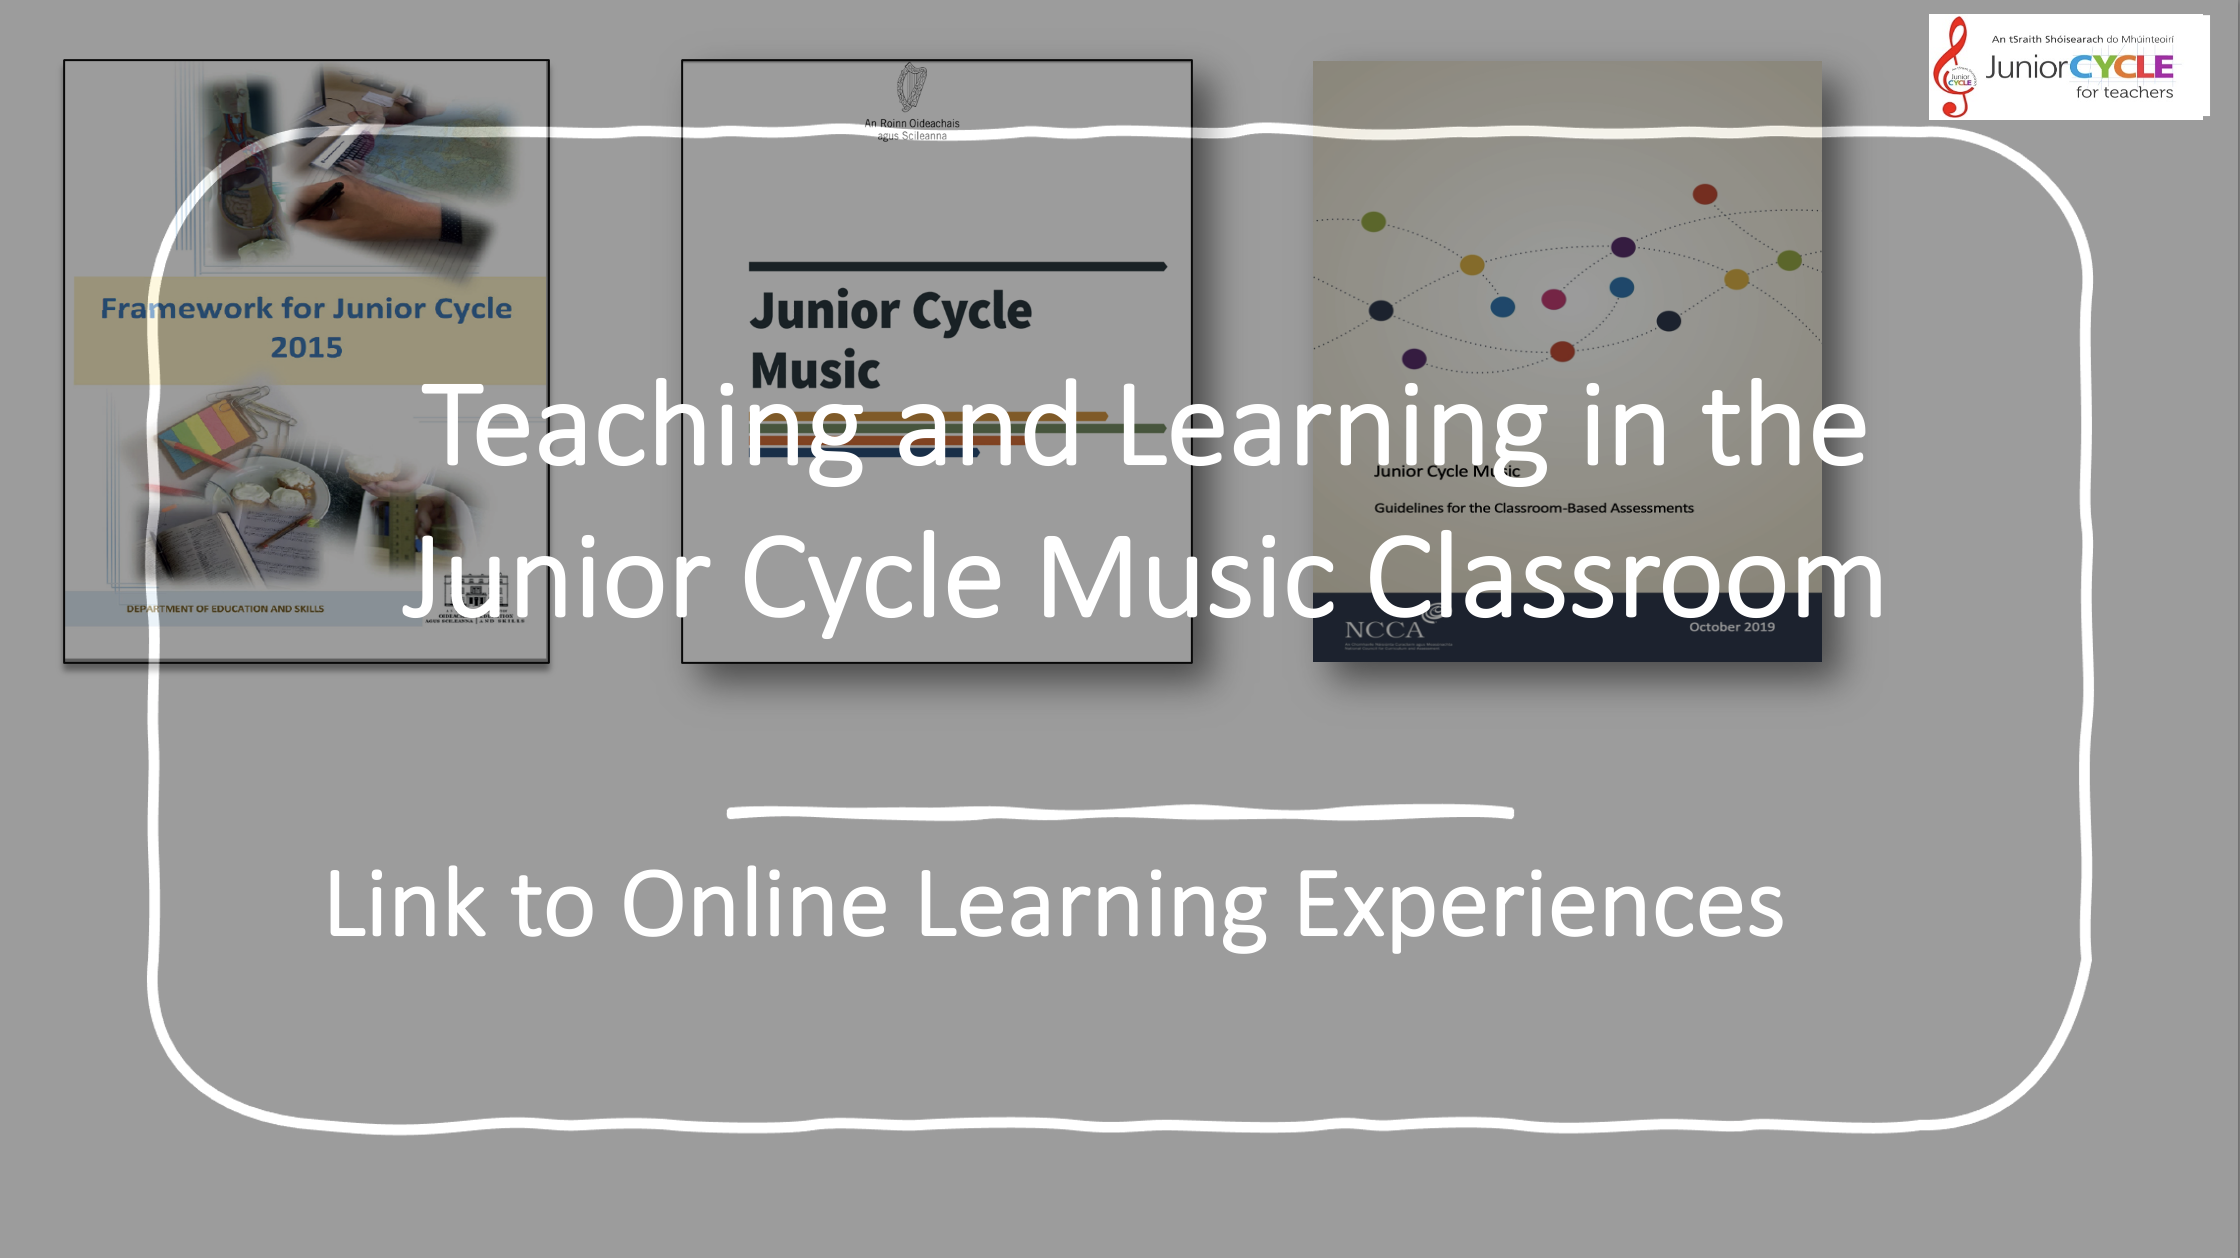 Link to Online Learning Experiences